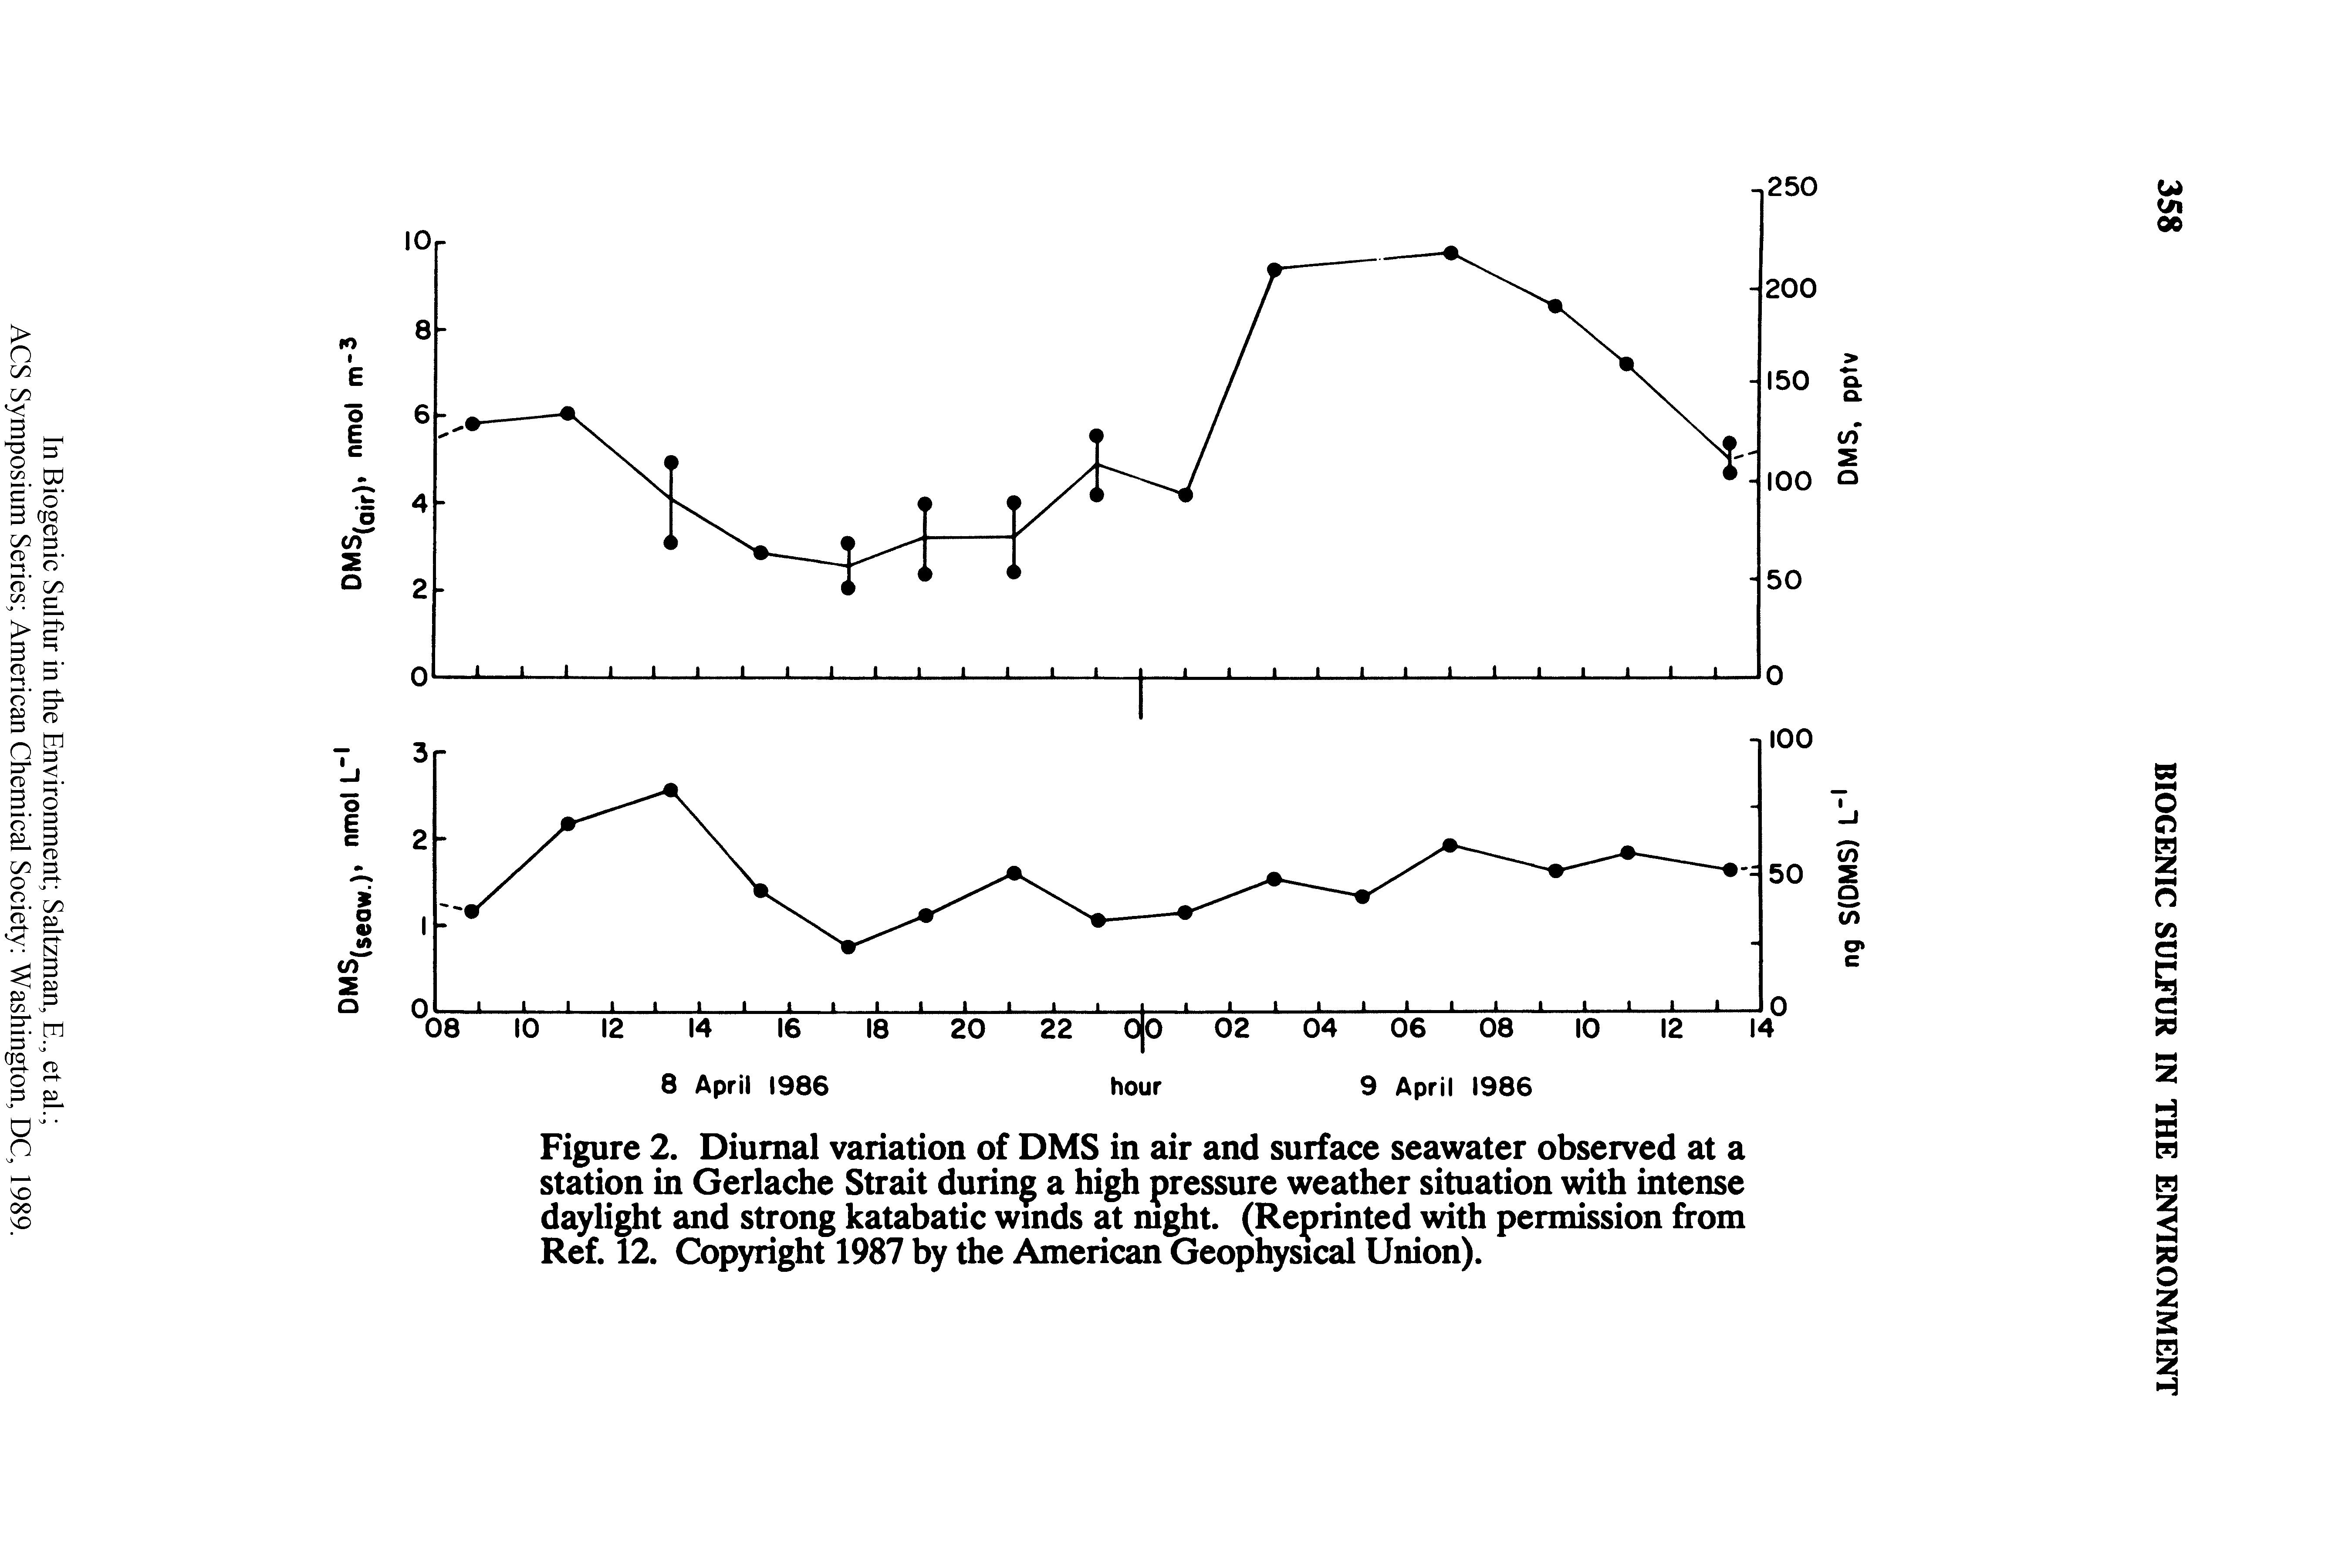 Figure 2. Diurnal variation of DMS in air and surface seawater observed at a station in Gerlache Strait during a high pressure weather situation with intense daylight and strong katabatic winds at night. (Reprinted with permission from Ref. 12. Copyright 1987 by the American Geophysical Union).